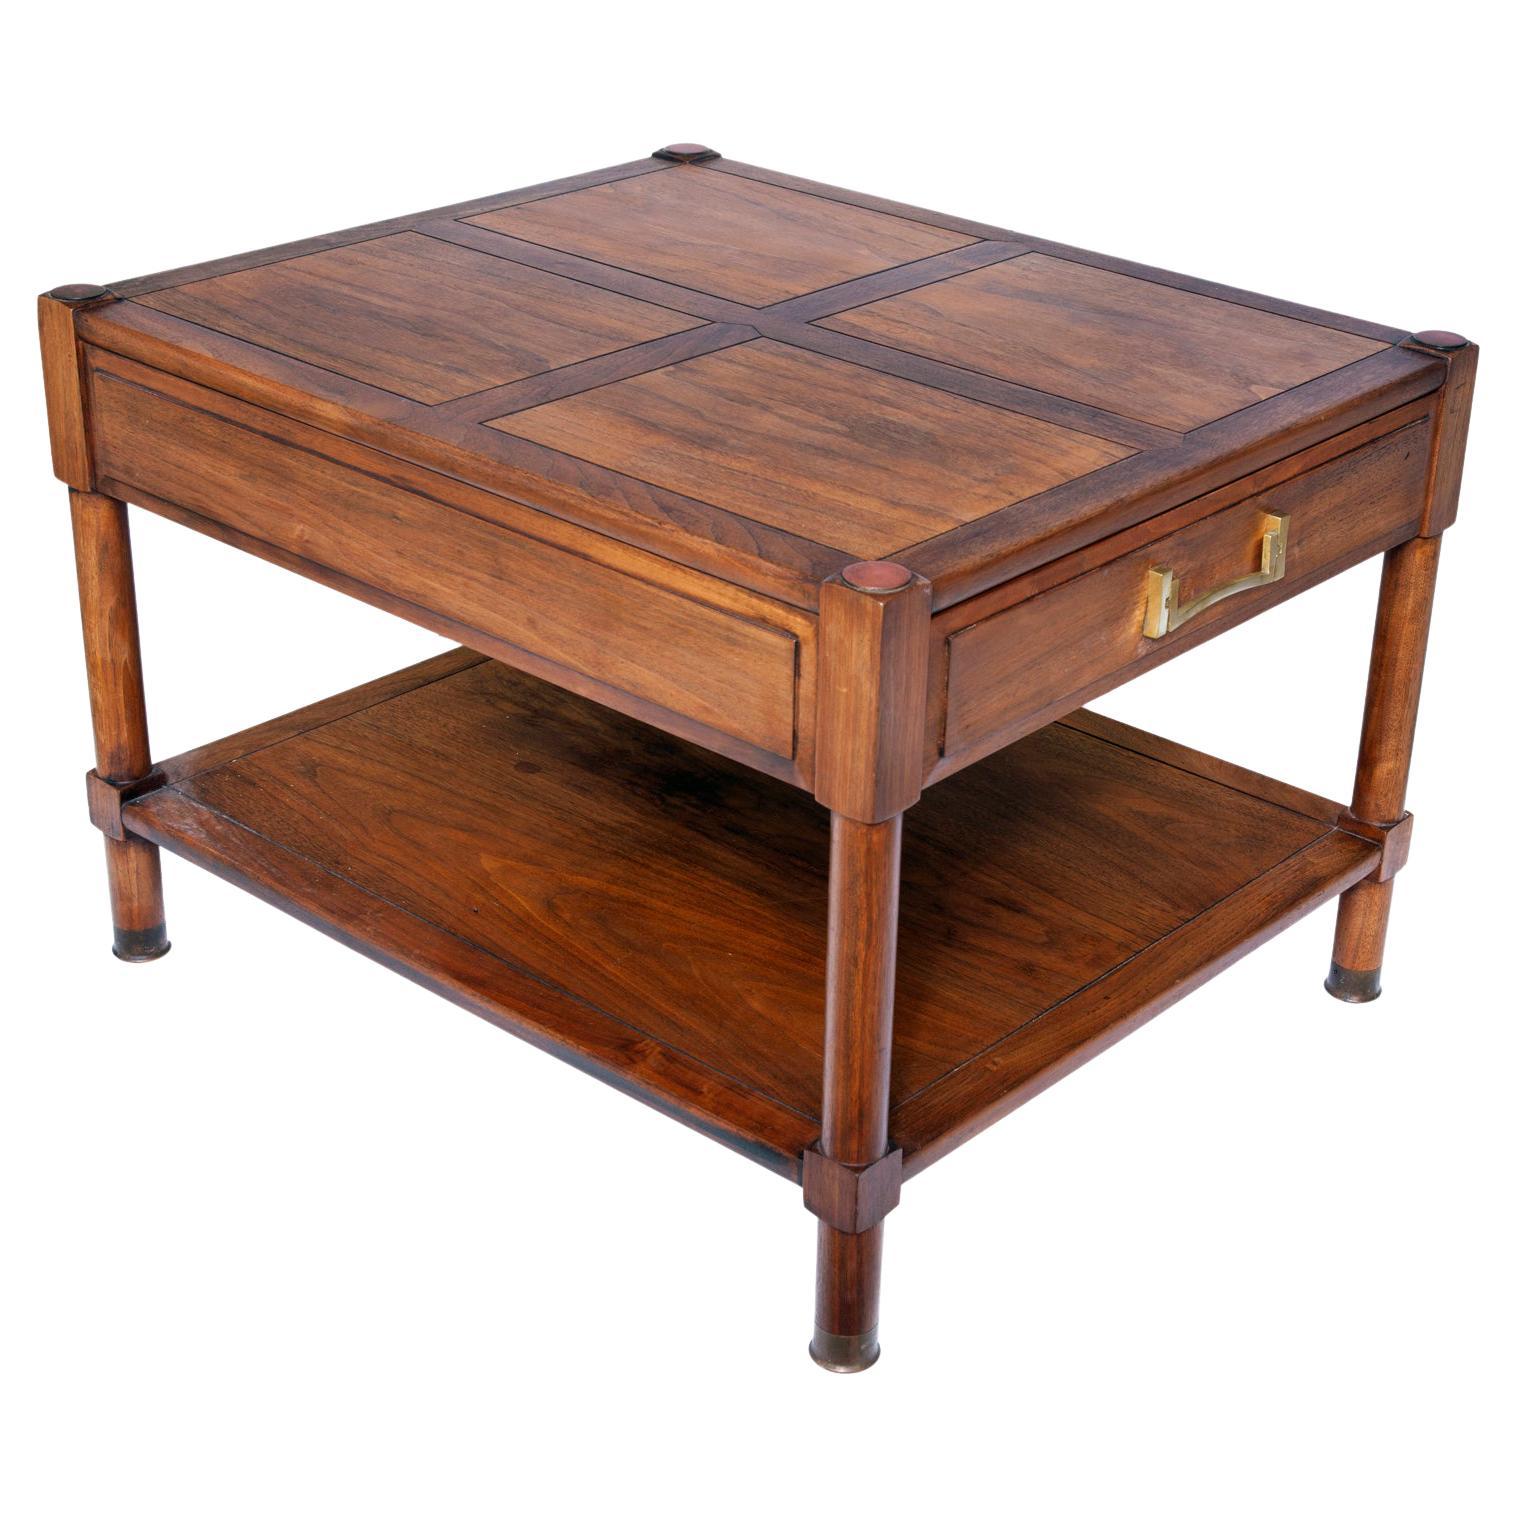 Classic mid-century walnut side tables by Heritage. Each table with unique brass hardware & a single drawer & a lower shelf. 
The feet are capped in brass, the lower shelf sits close to the floor.
Restored in a rich warm brown user friendly finish